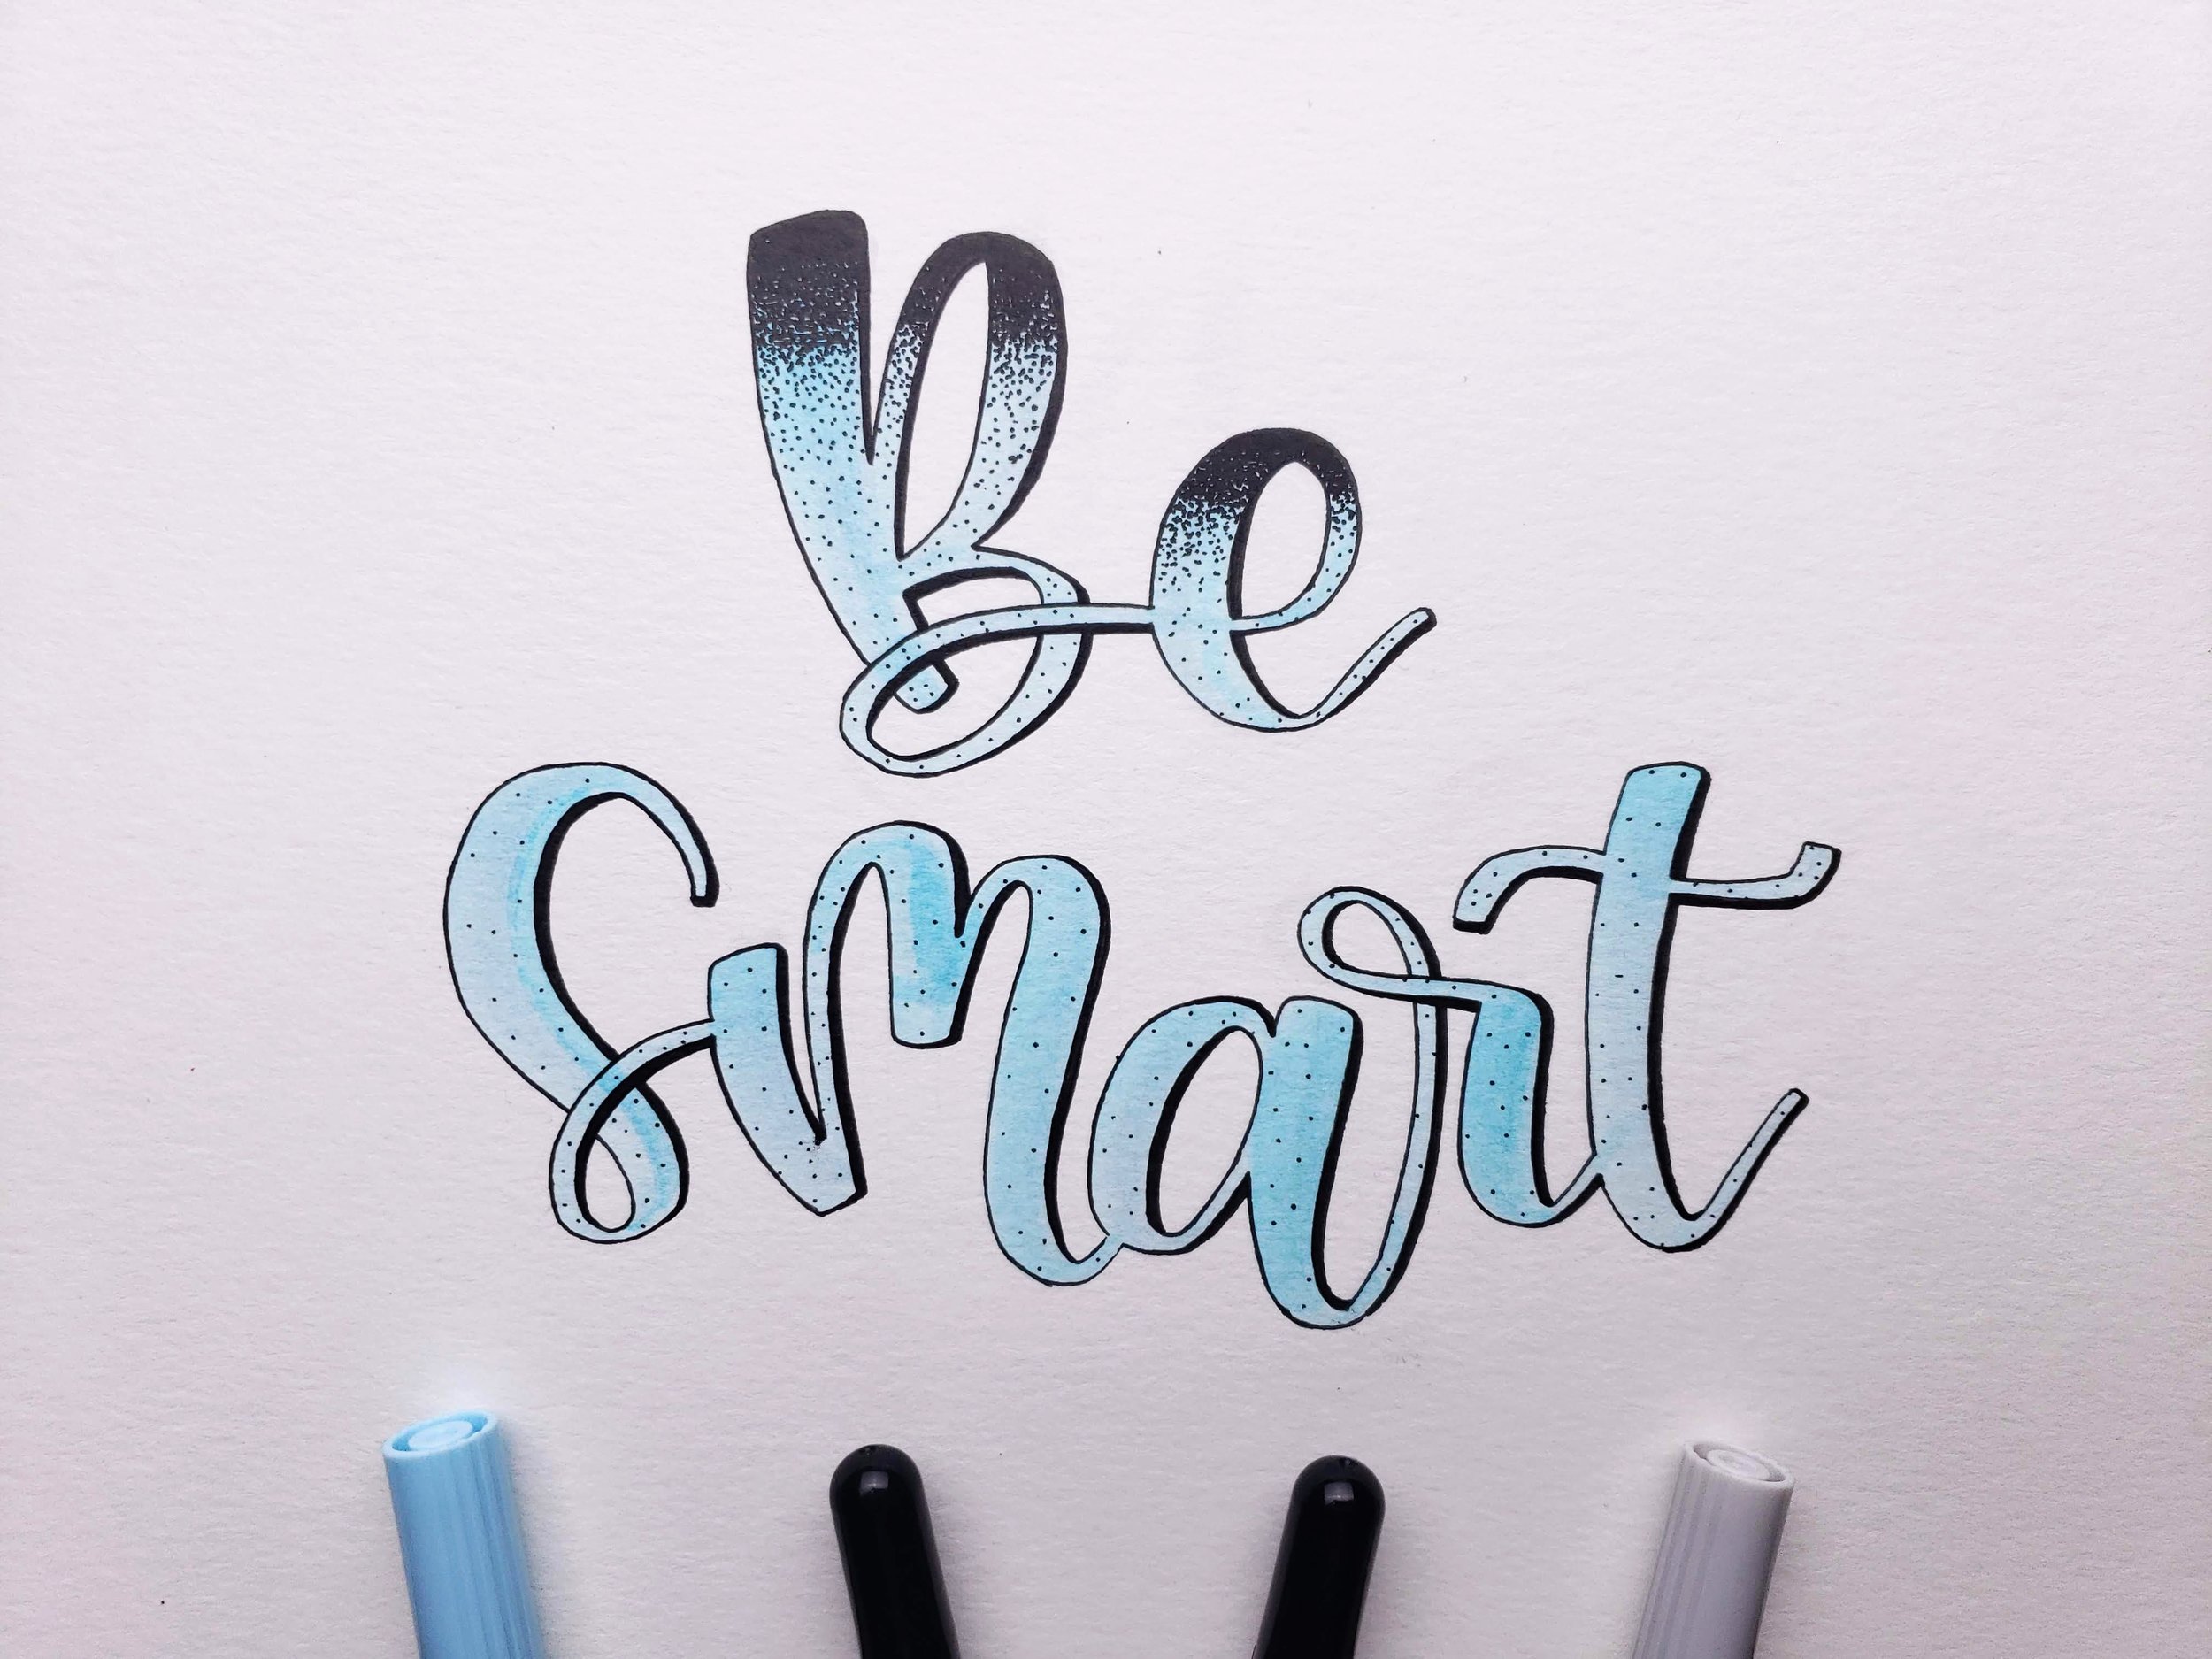 Learn Hand Lettering, the Charming Art of Custom Letterforms